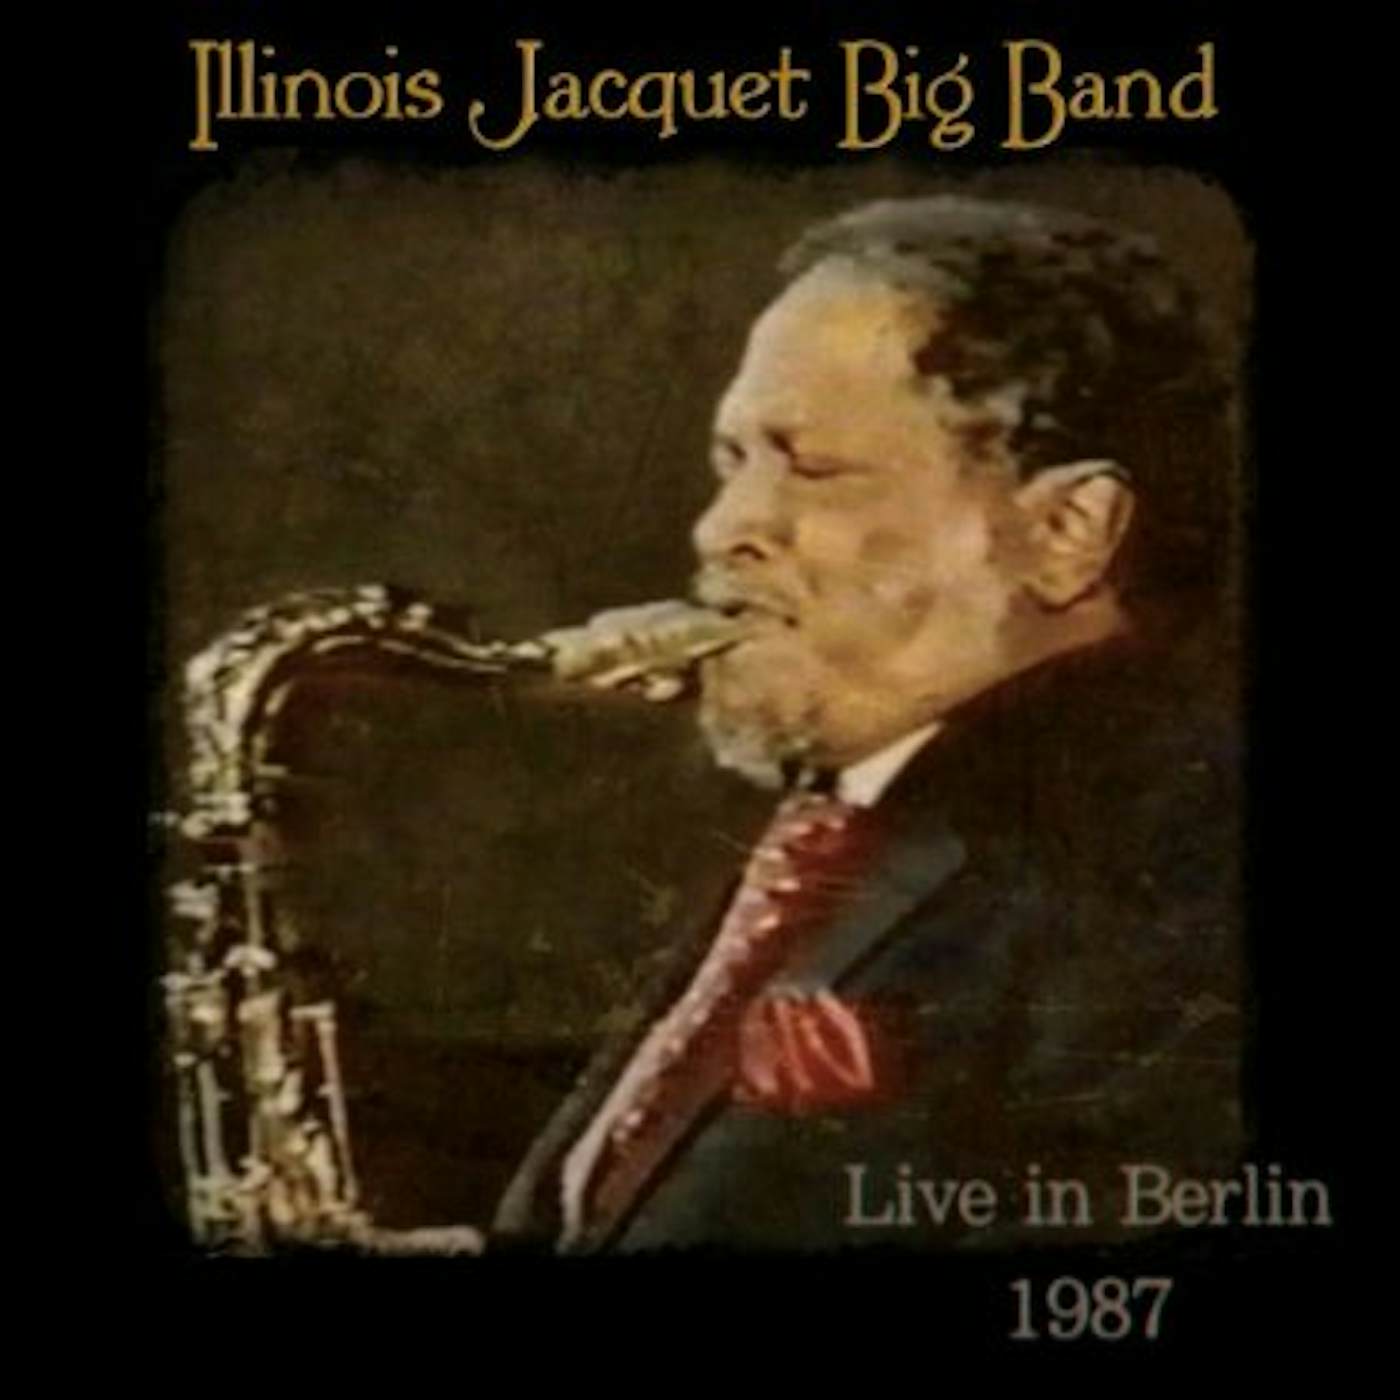 Illinois Jacquet BIG BAND LIVE IN BERLIN 1987 CD